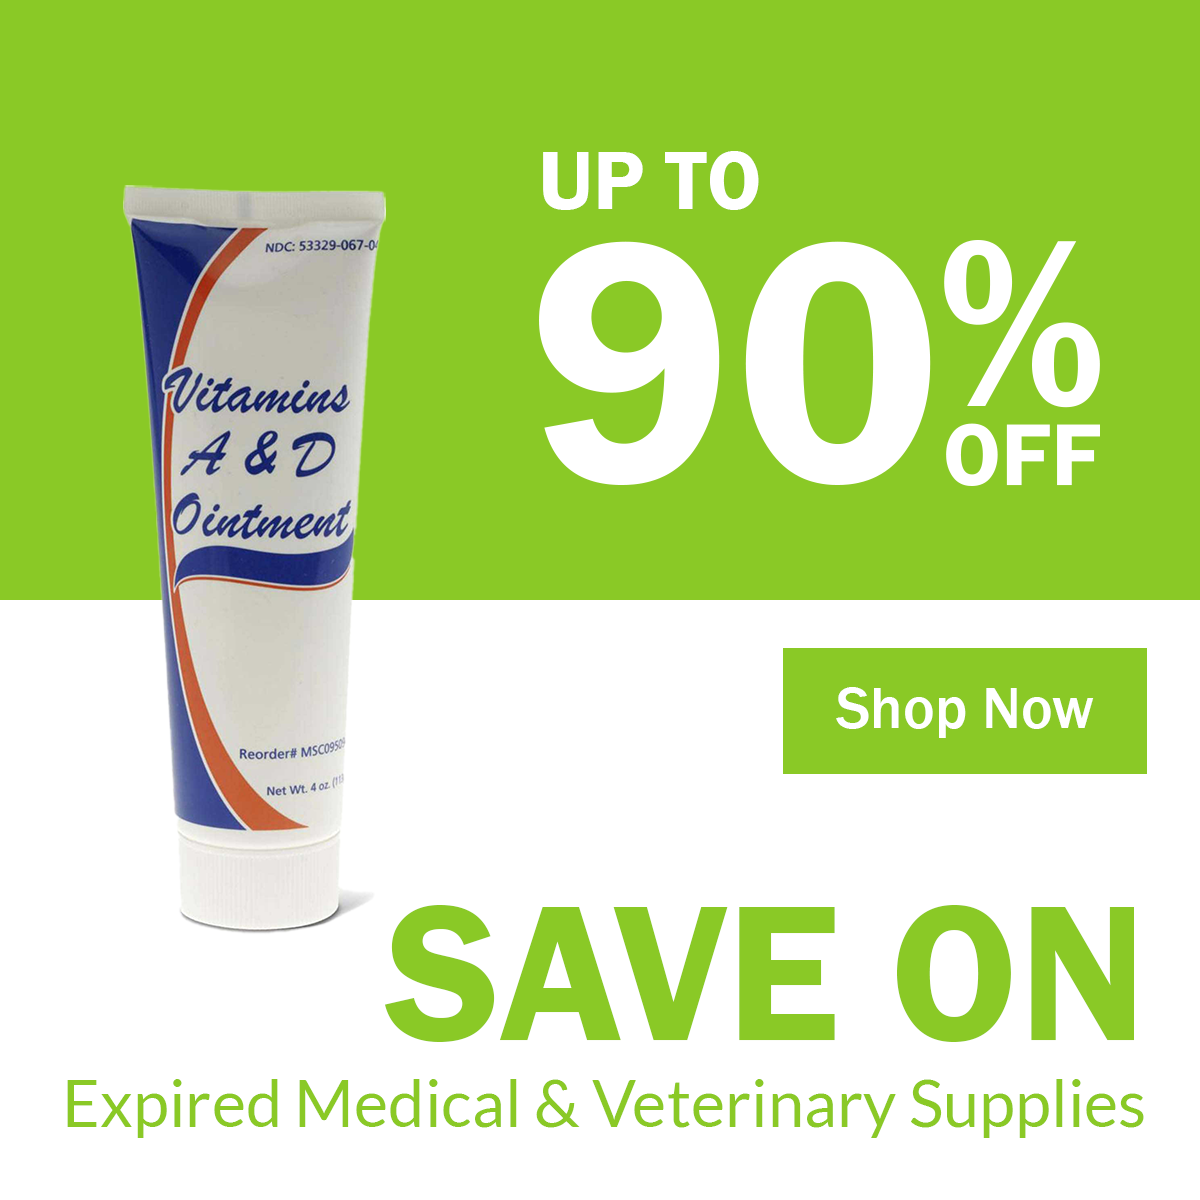 Up to 90% off expired Medical and veterinary supplies